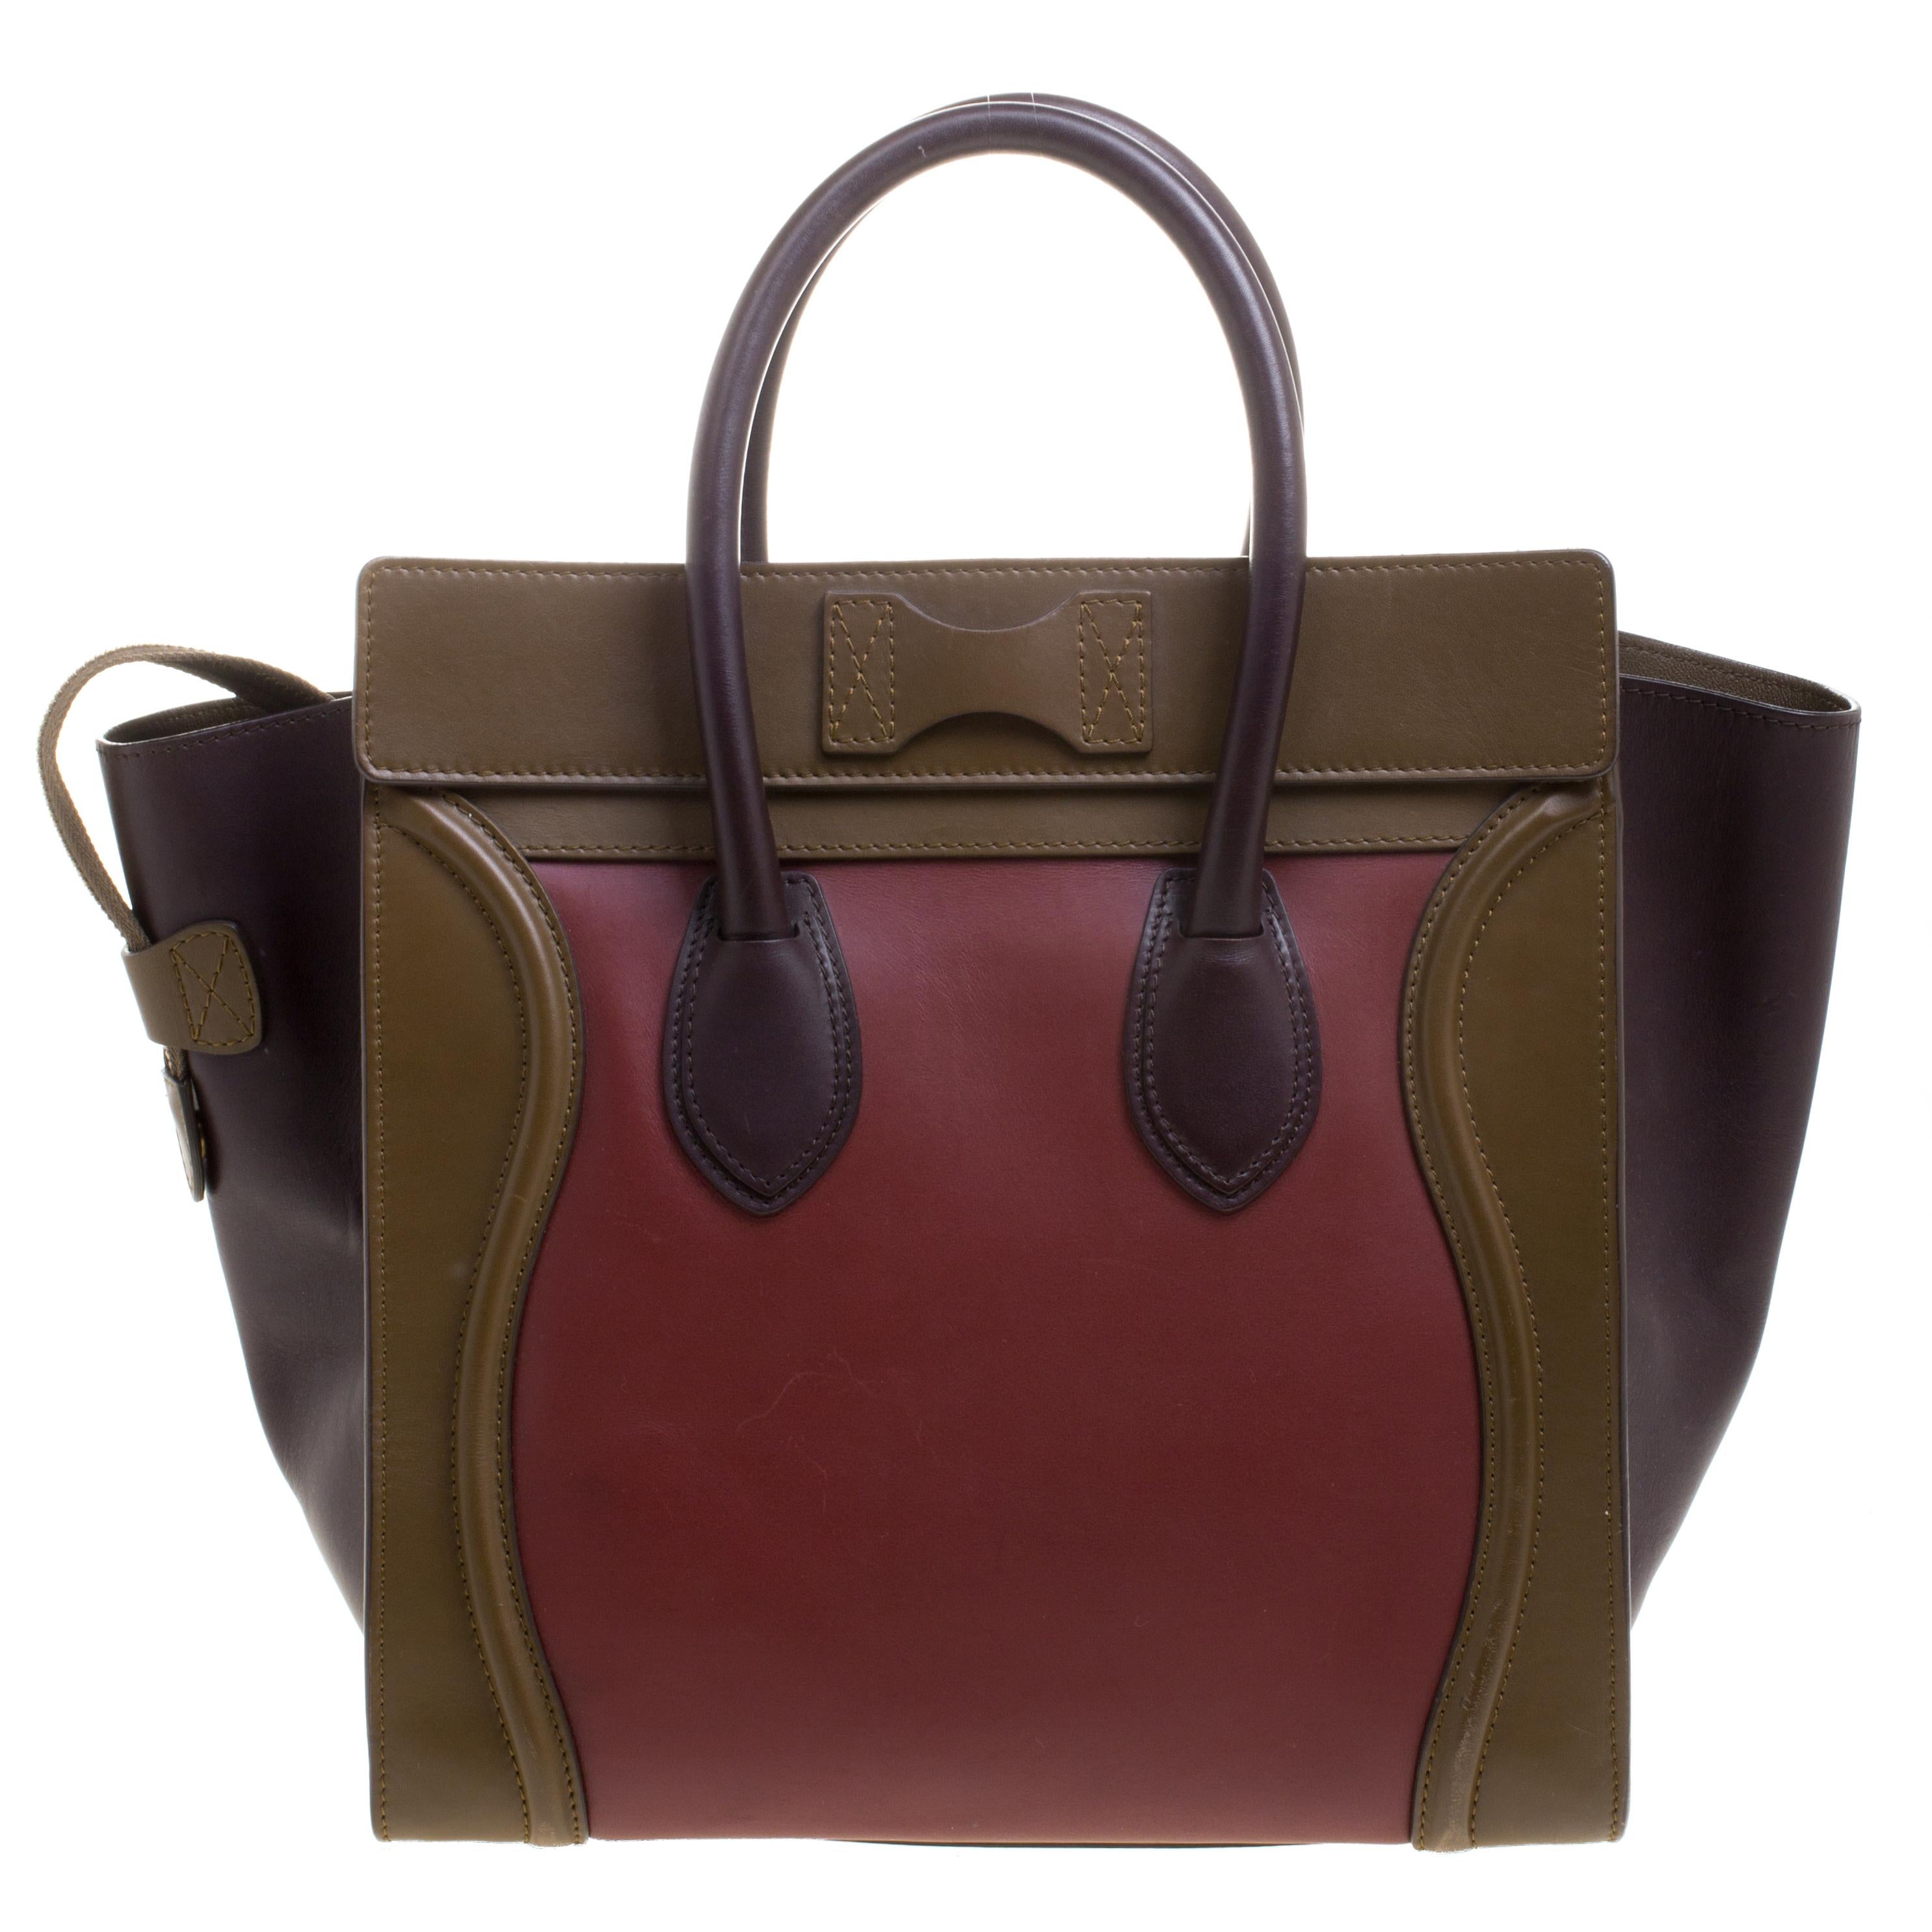 The Mini Luggage tote from Celine is one of the most popular handbags in the world. This tote is crafted from leather and it features a classy touch of three colours along with the signature flappy wings. It comes with rolled top handles, front zip